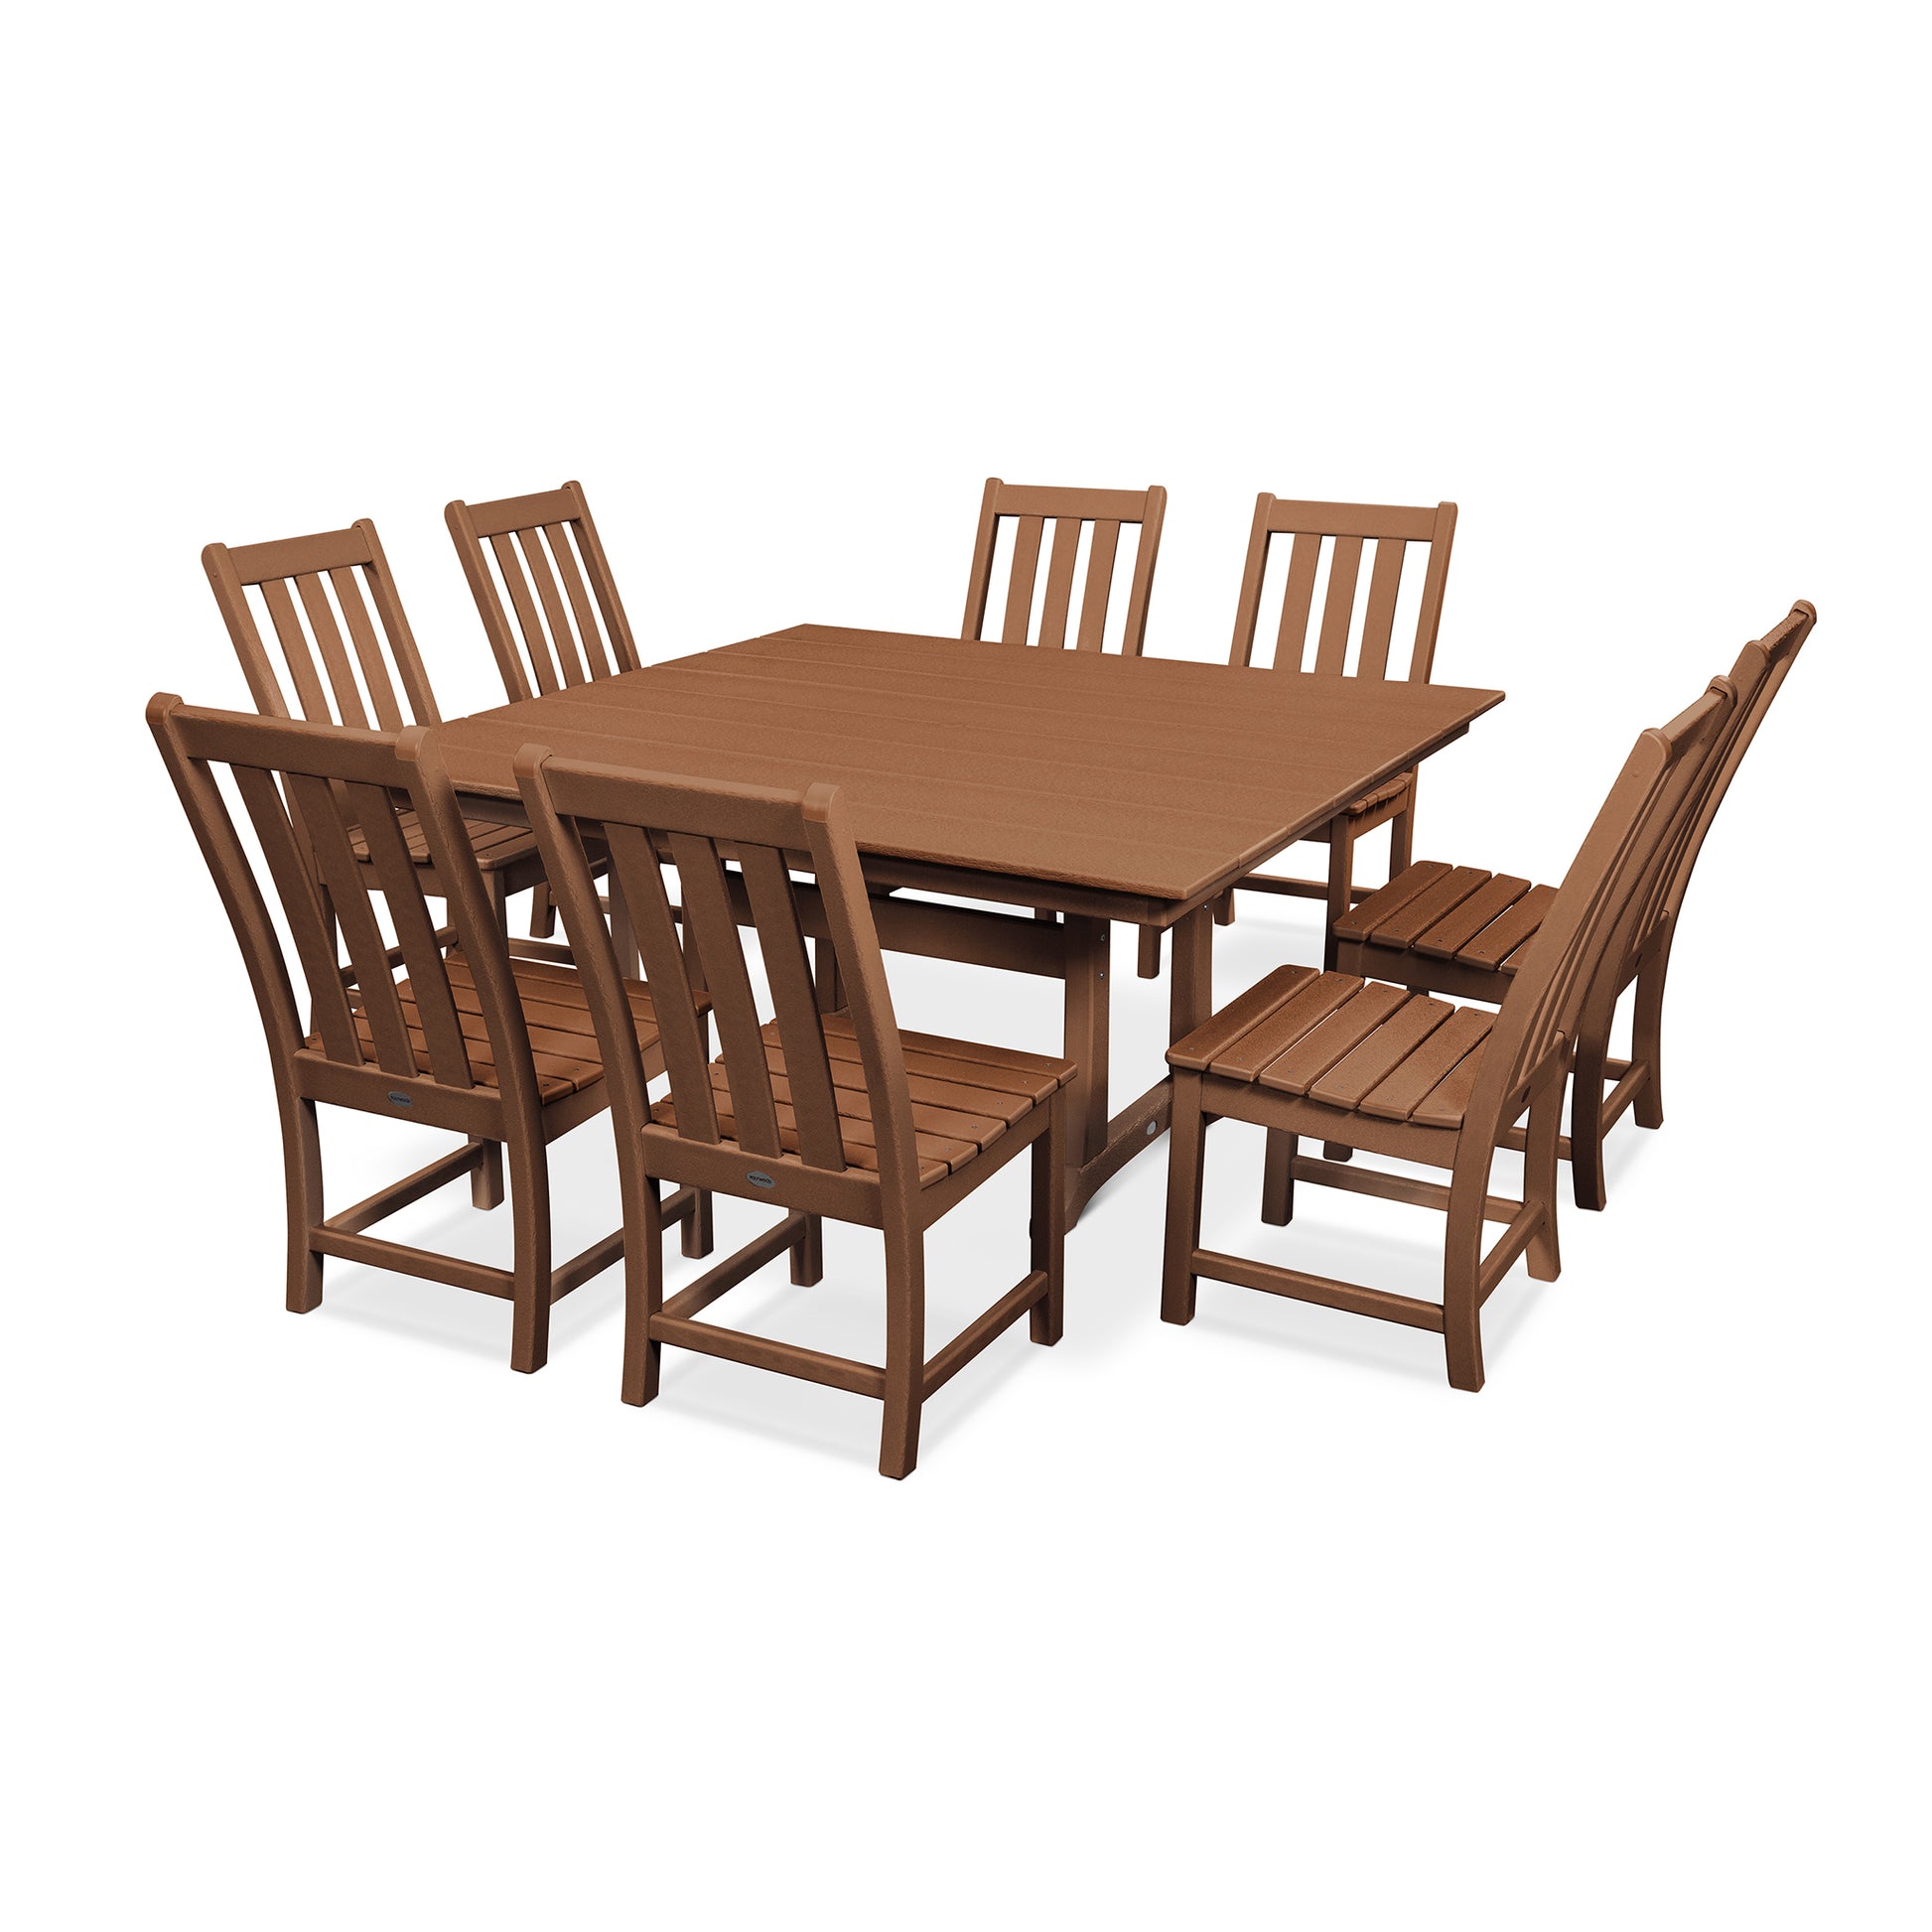 A brown POLYWOOD® Vineyard 9-Piece Farmhouse Trestle Dining Set consisting of a rectangular table and six matching chairs with vertical slat backs, all made of synthetic wood, isolated on a white background.